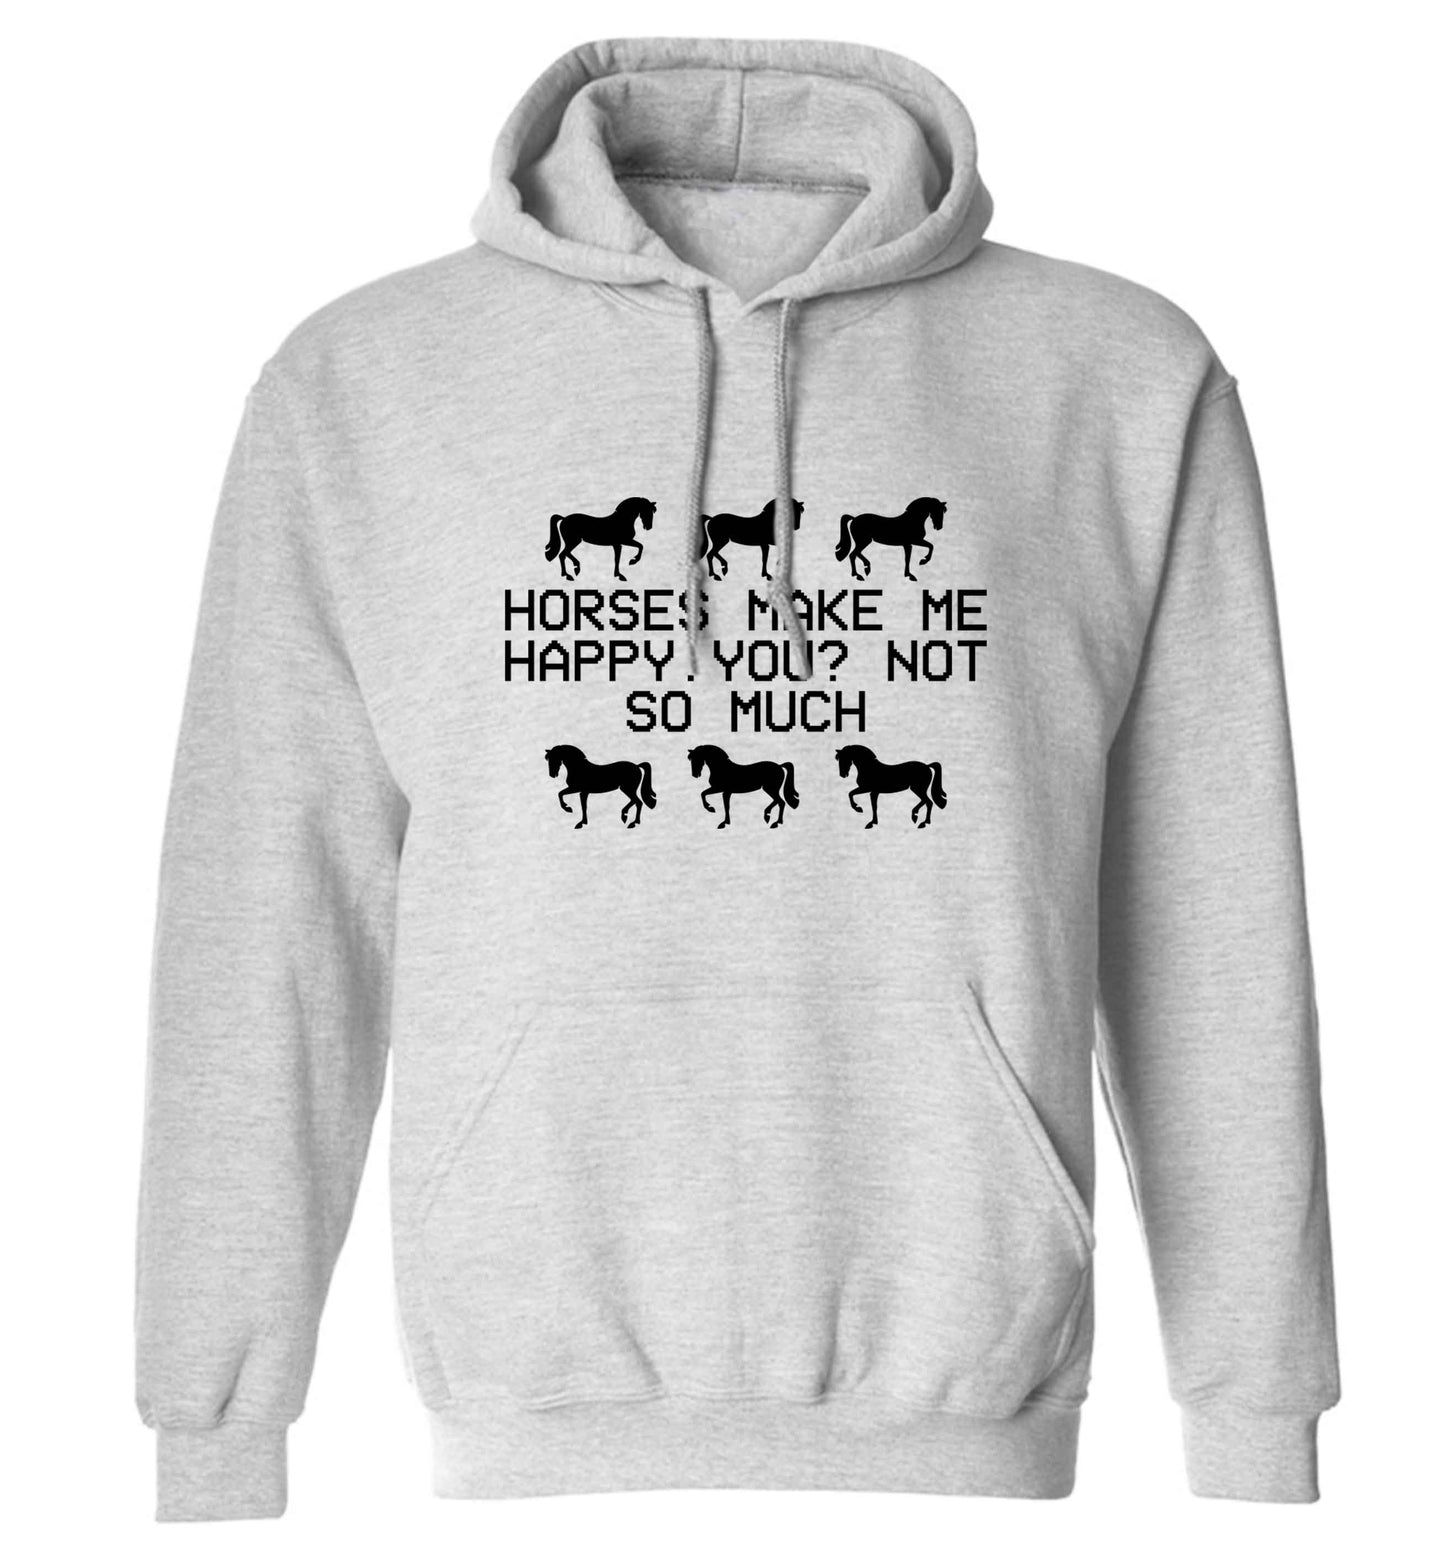 Horses make me happy, you not so much adults unisex grey hoodie 2XL